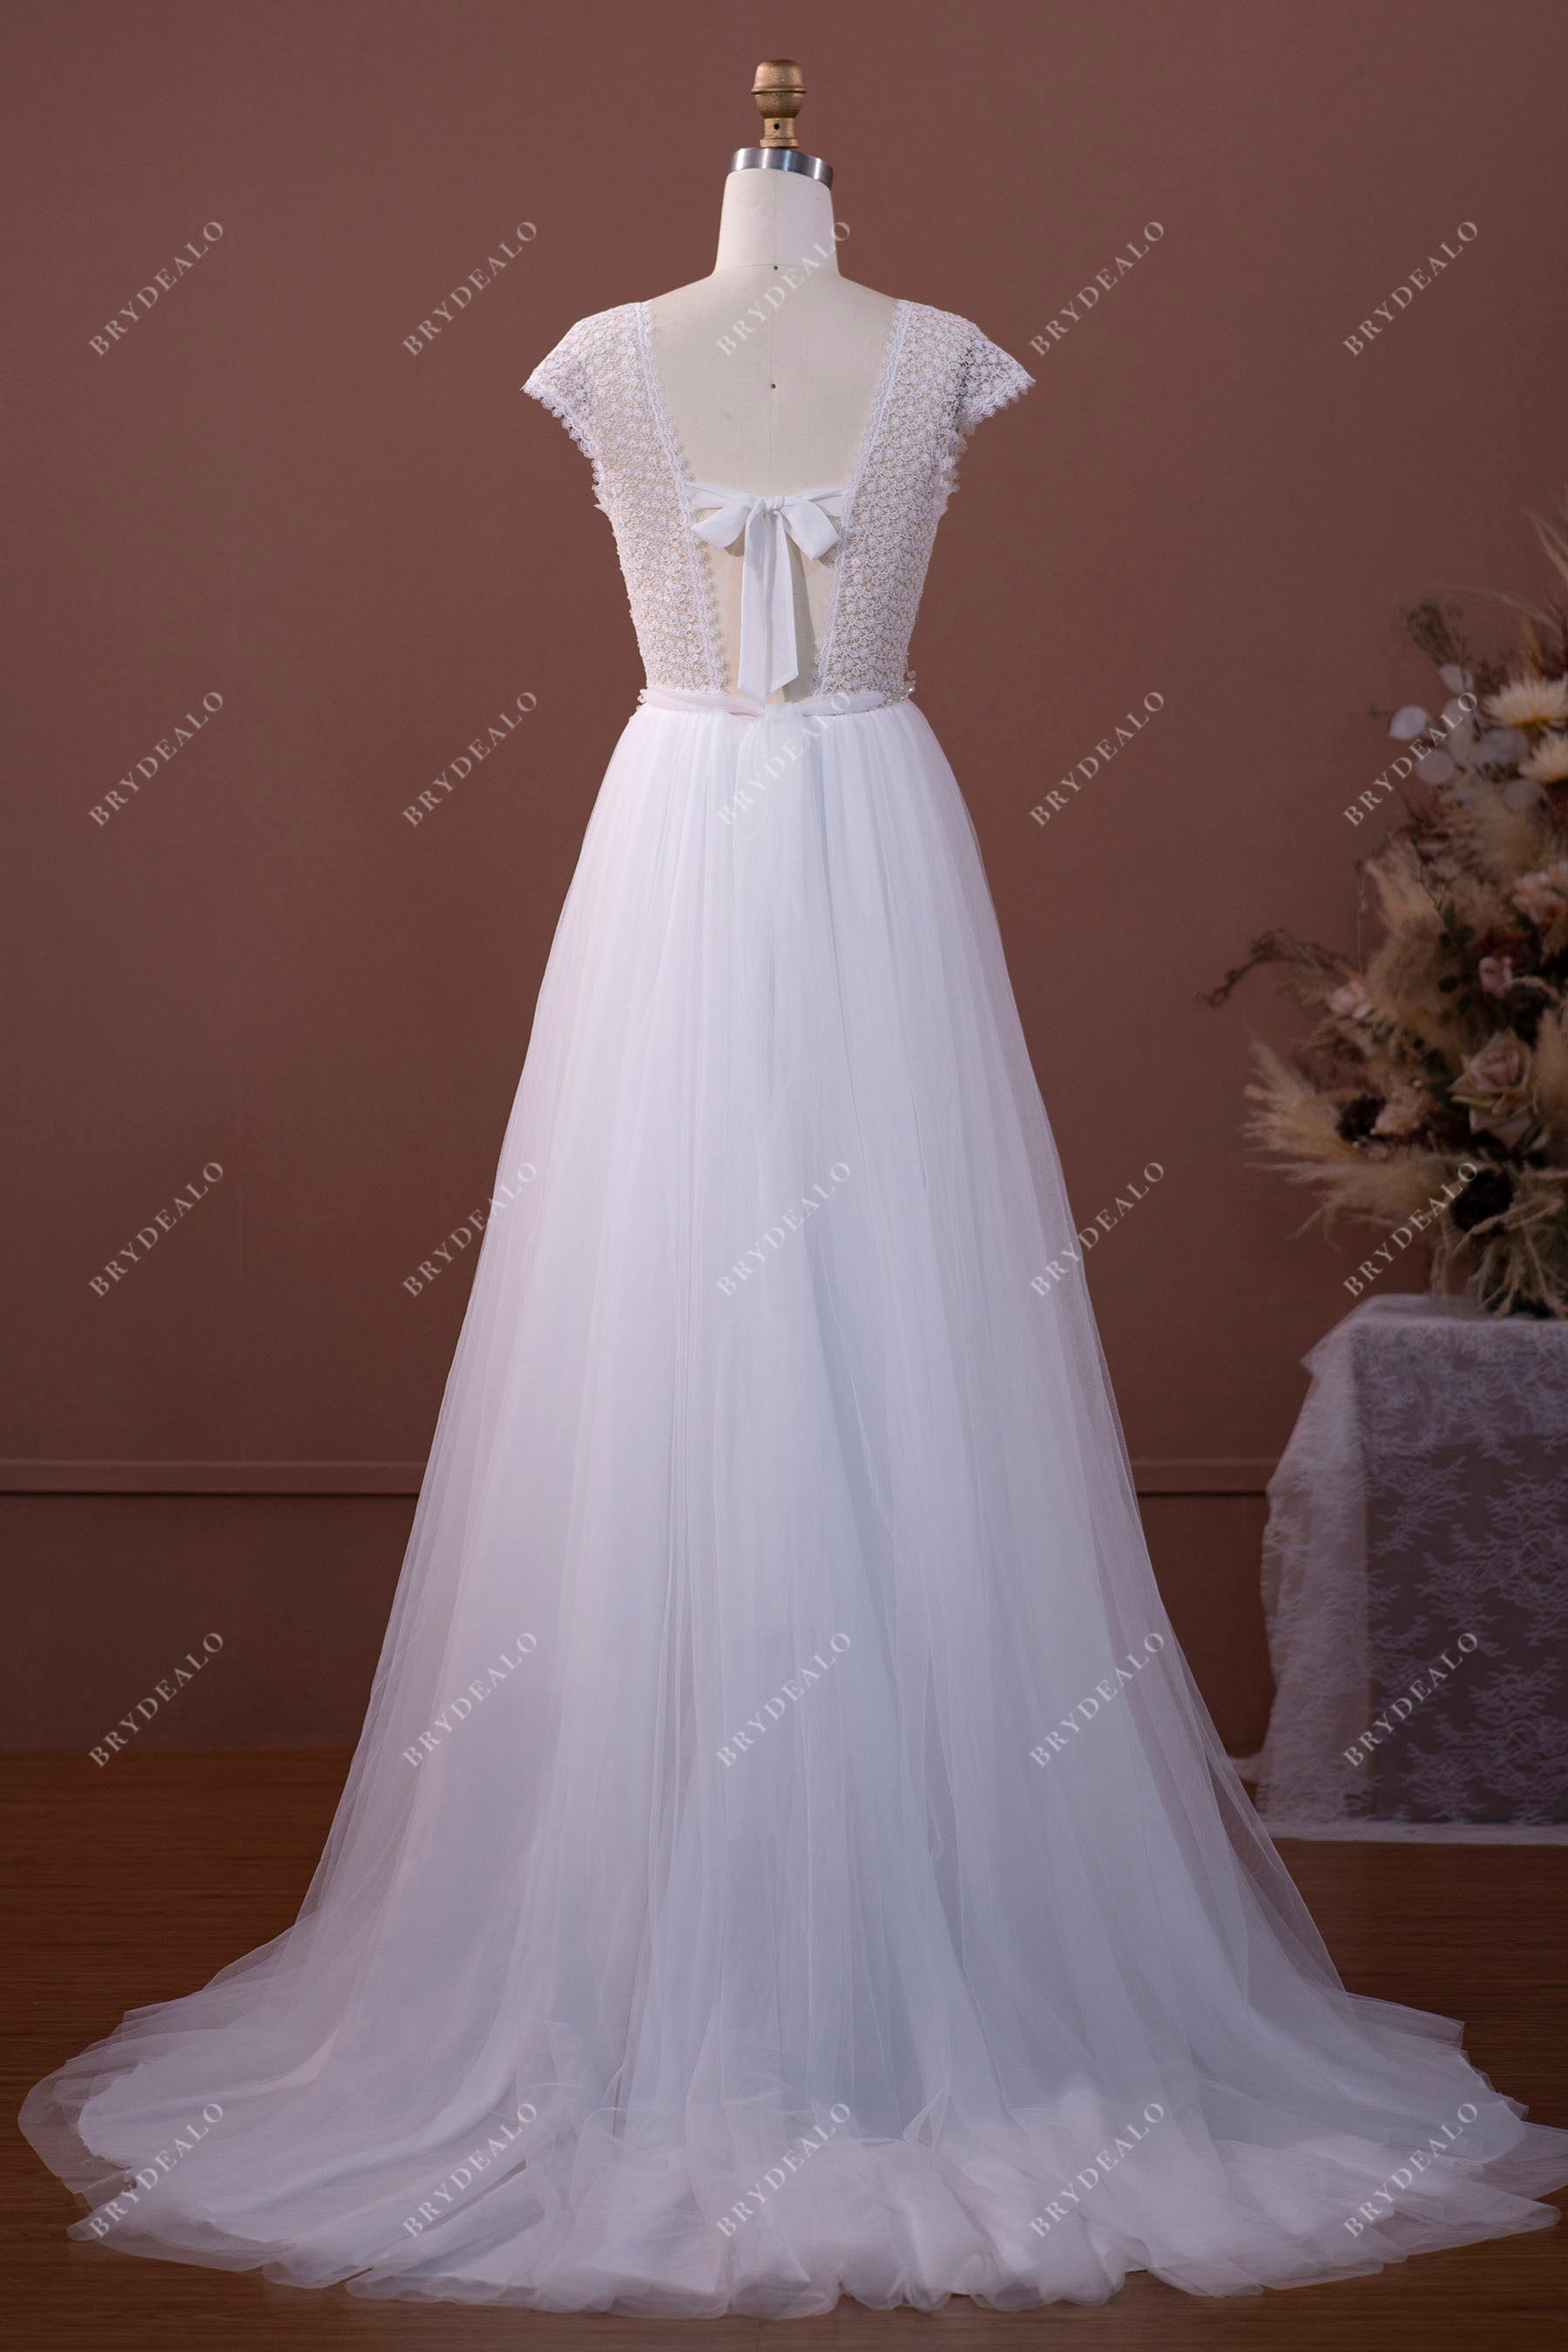 Self-tie Bowknot Illusion Floral Lace  Bridal Gown